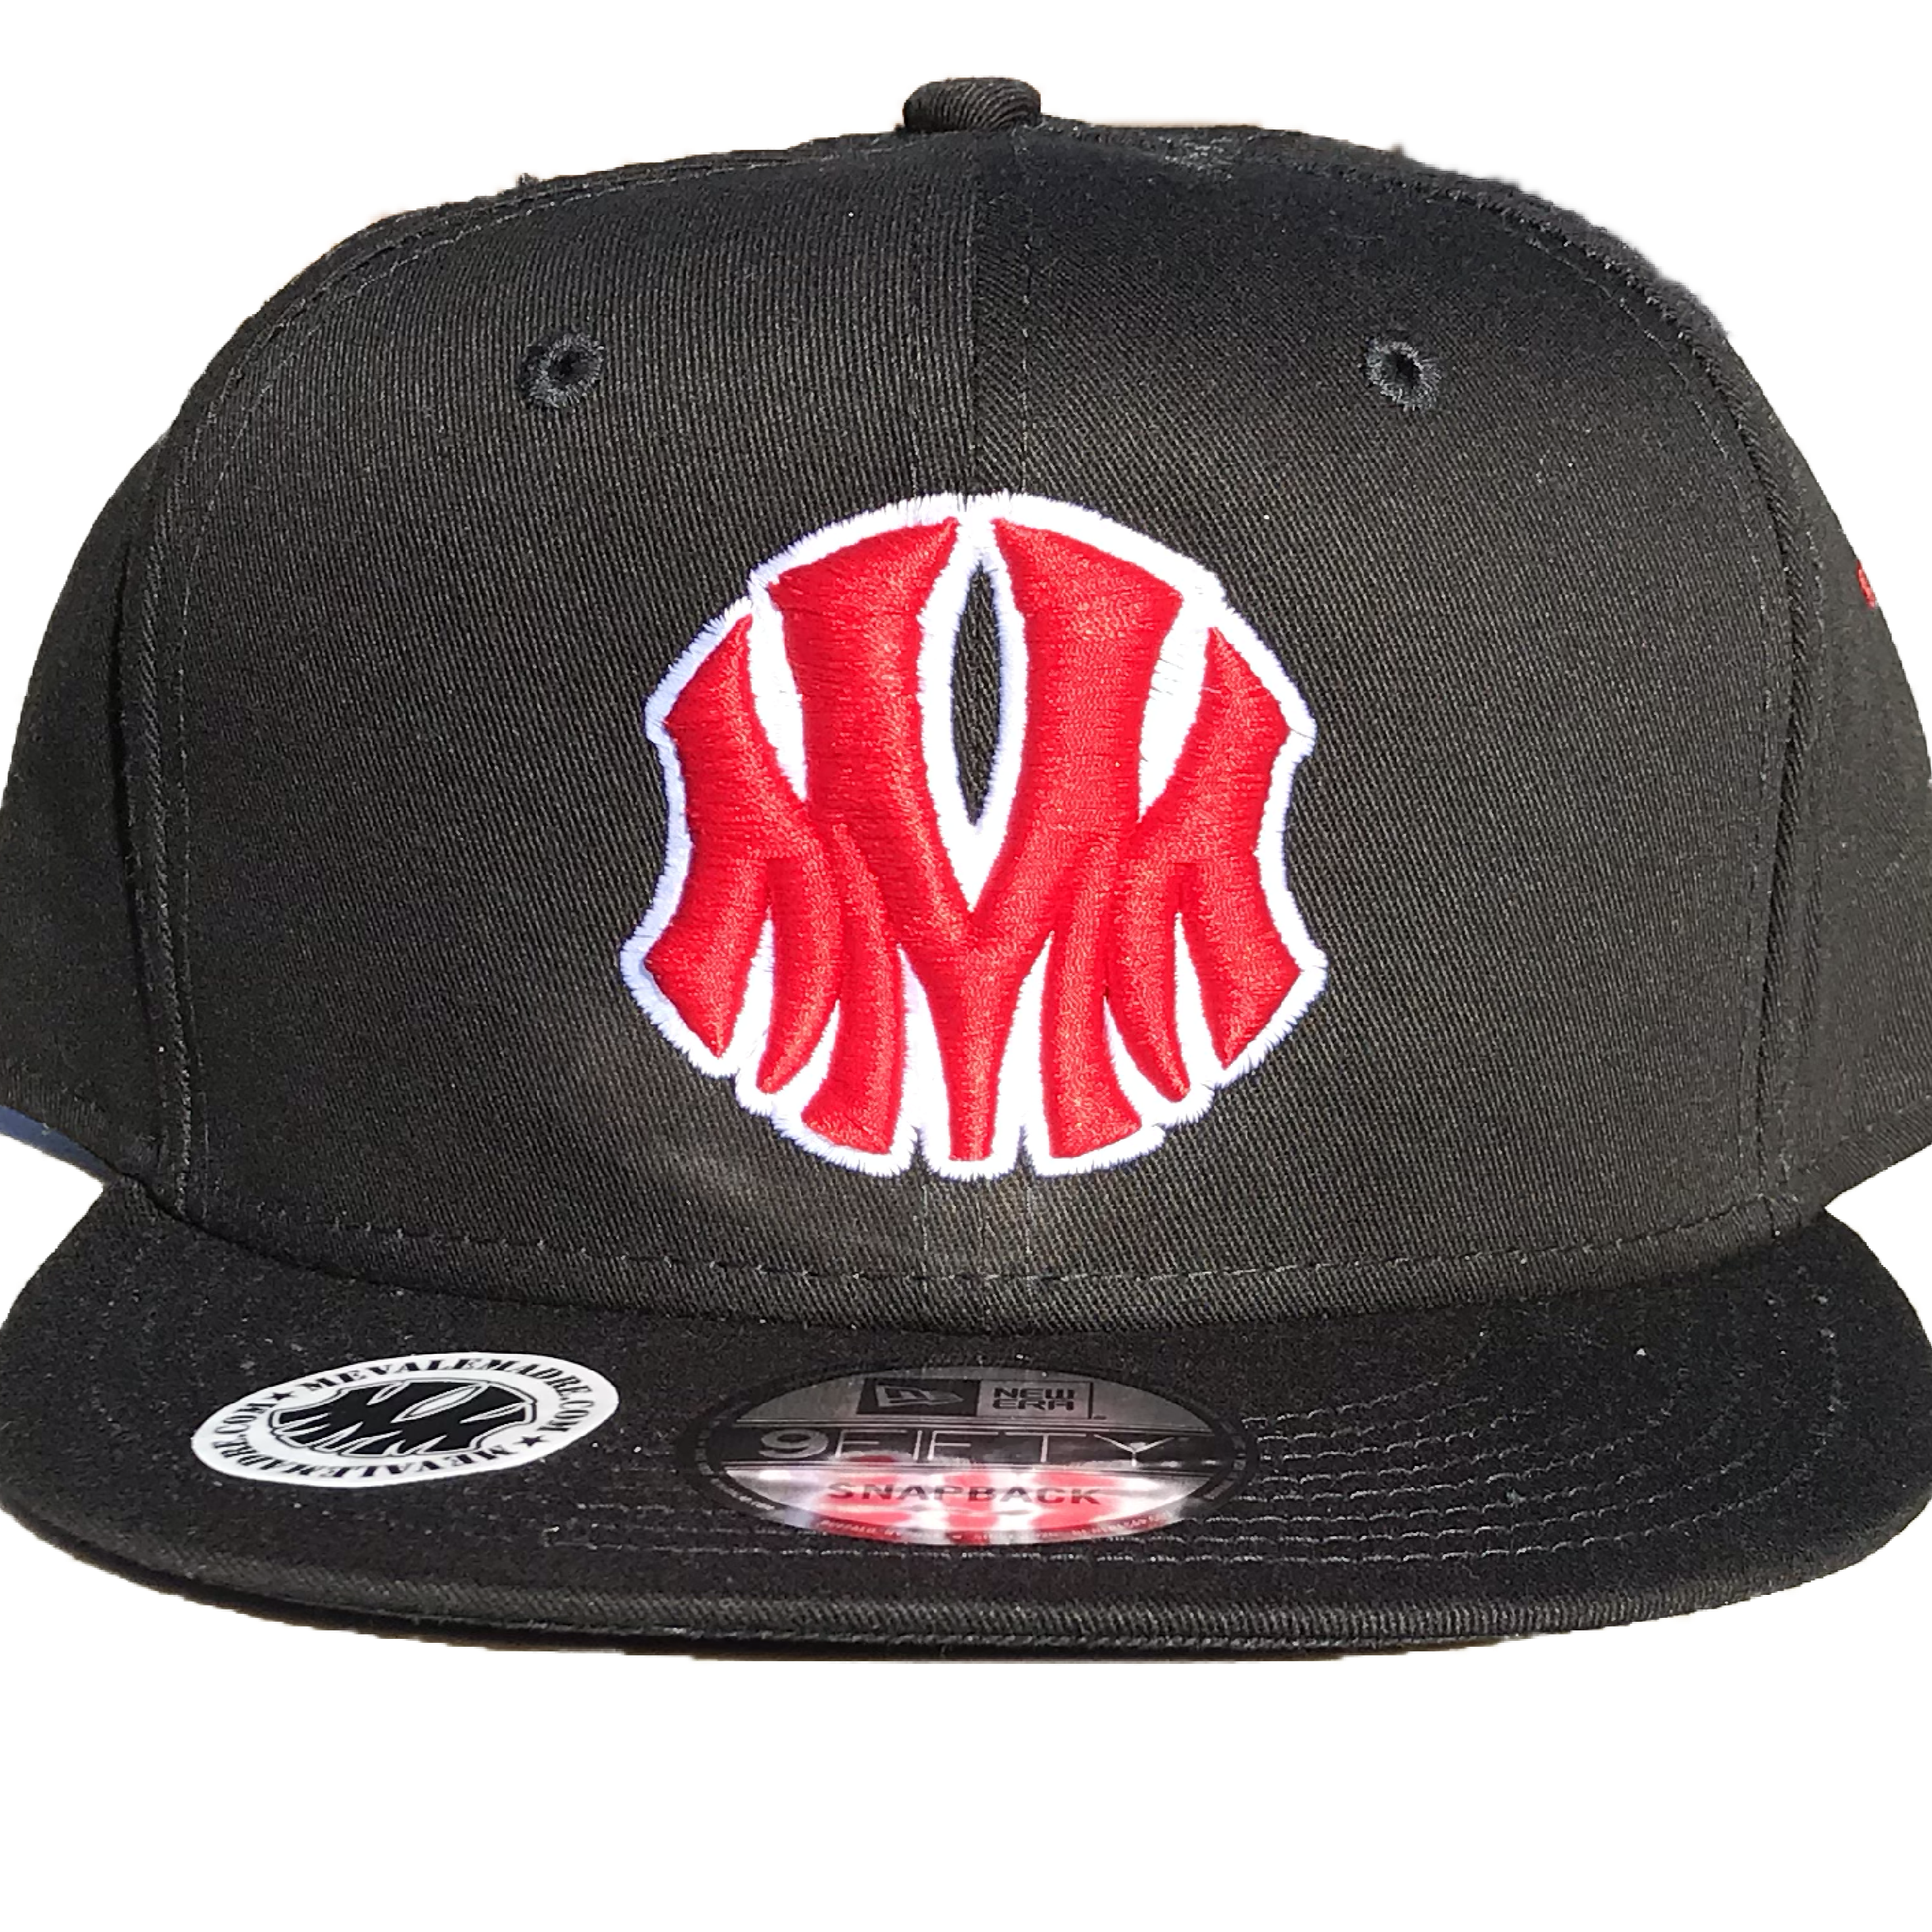 Embroidered Me Vale Madre logo on a New Era SNAPBACK cap